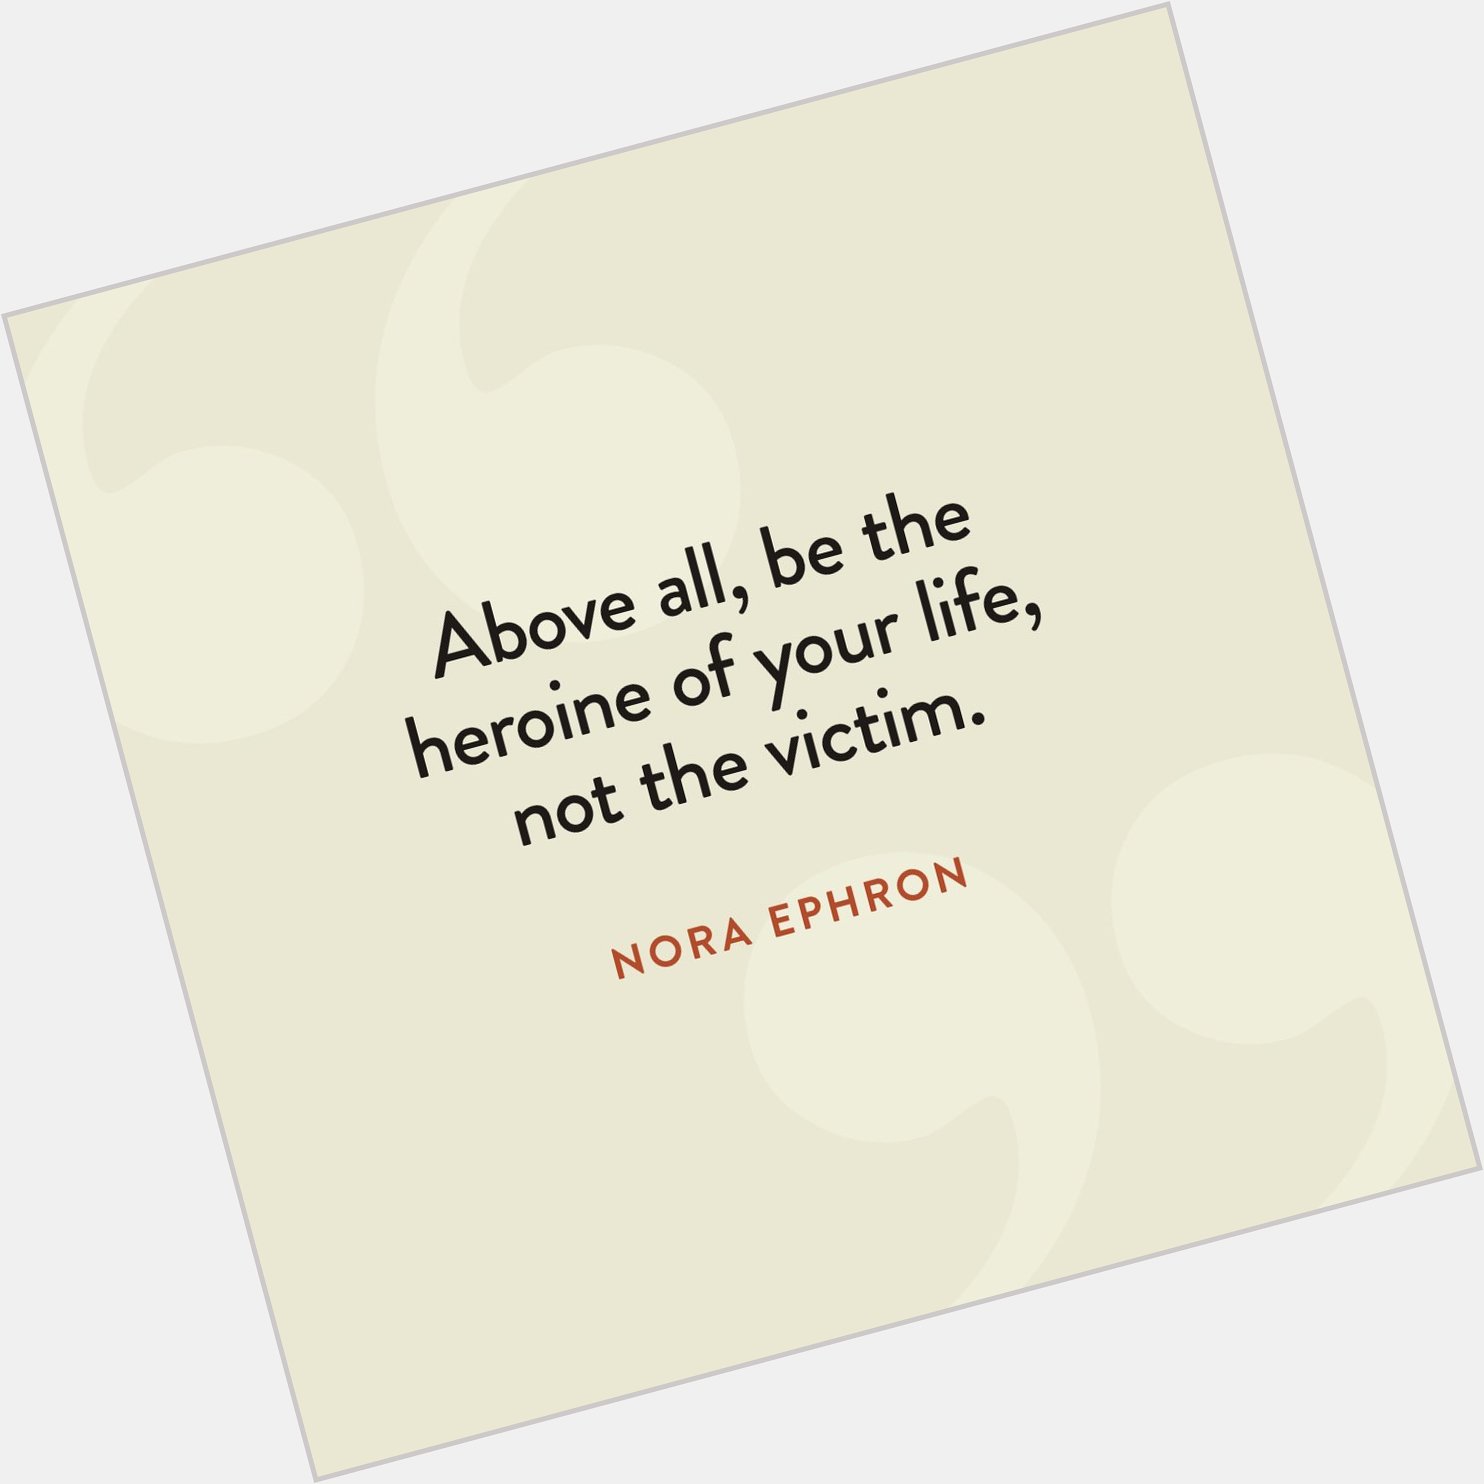 Happy birthday to Nora Ephron, who was born on this day in 1941!  